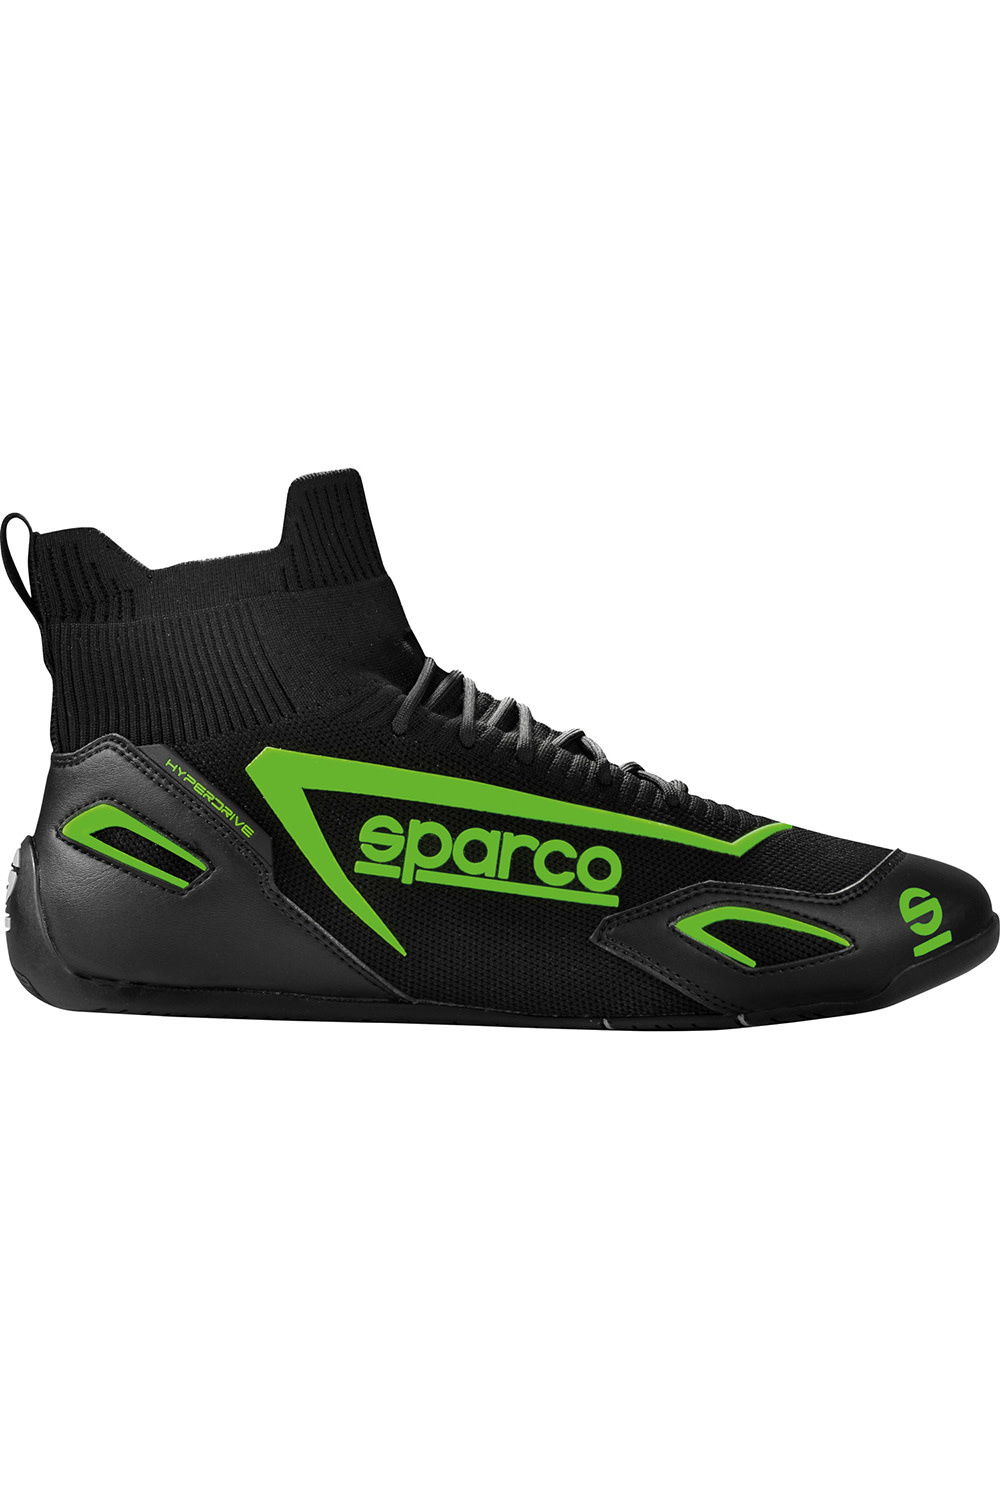 Sparco Hyperdrive SimRacing Shoes Black-Green